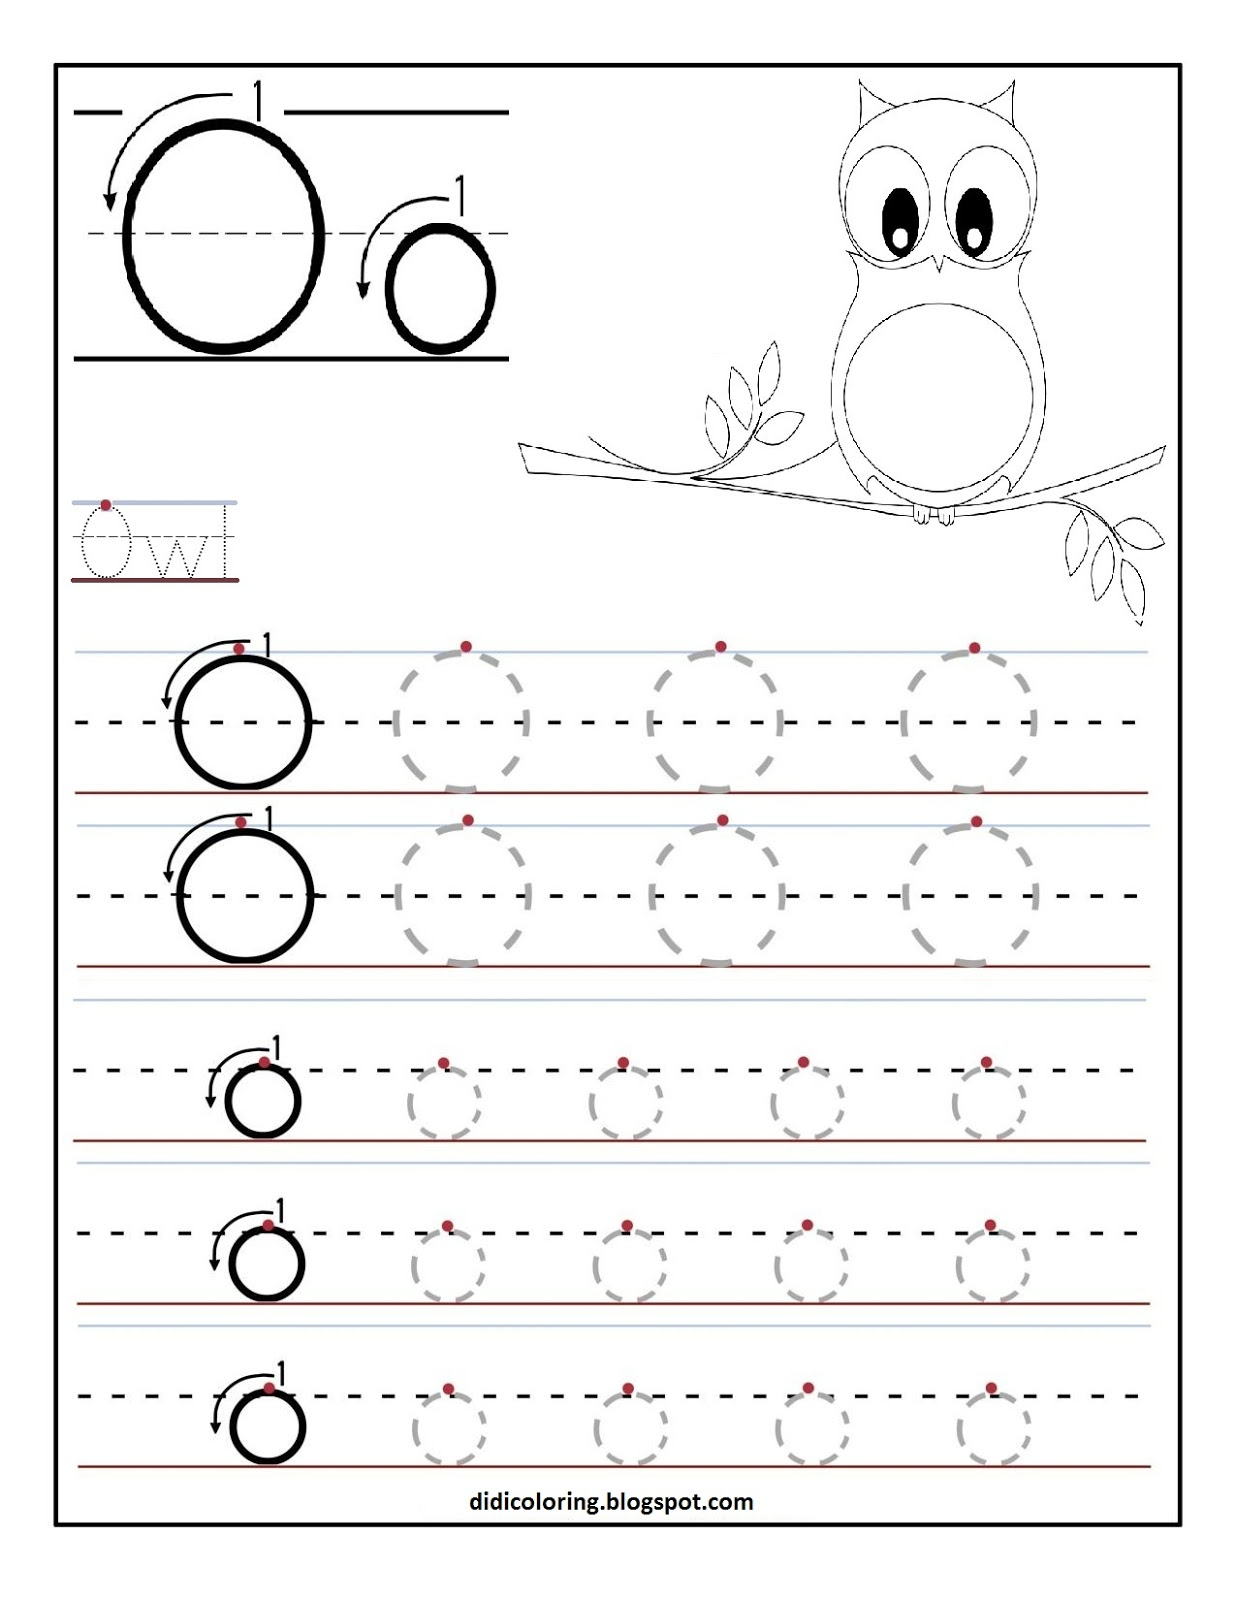 Didi Coloring Page: Free Printable Worksheet Letter O For intended for Letter O Tracing Page